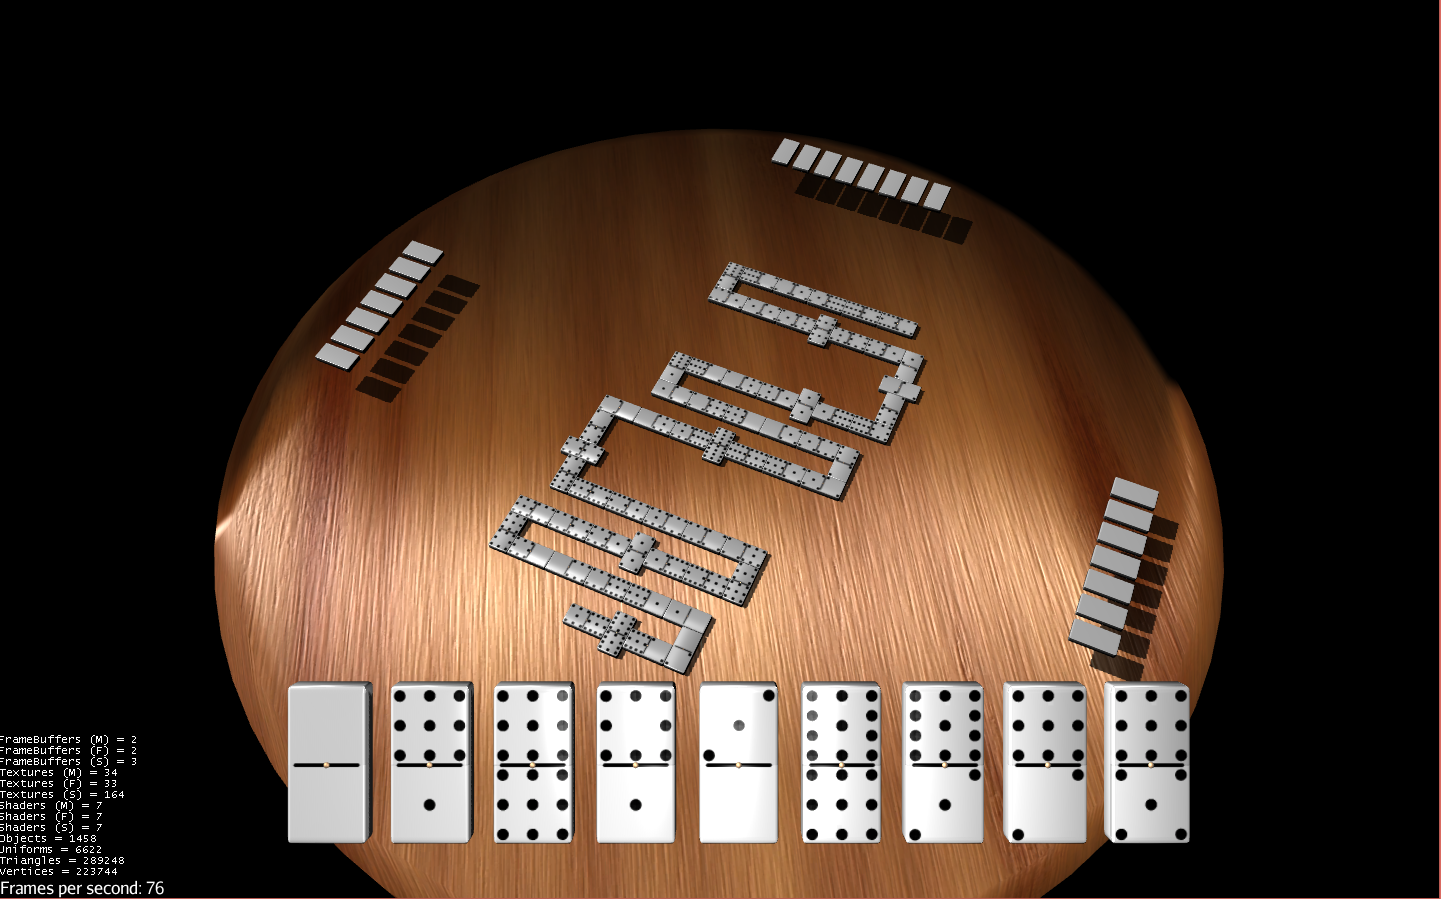 download the new version for mac Dominoes Deluxe